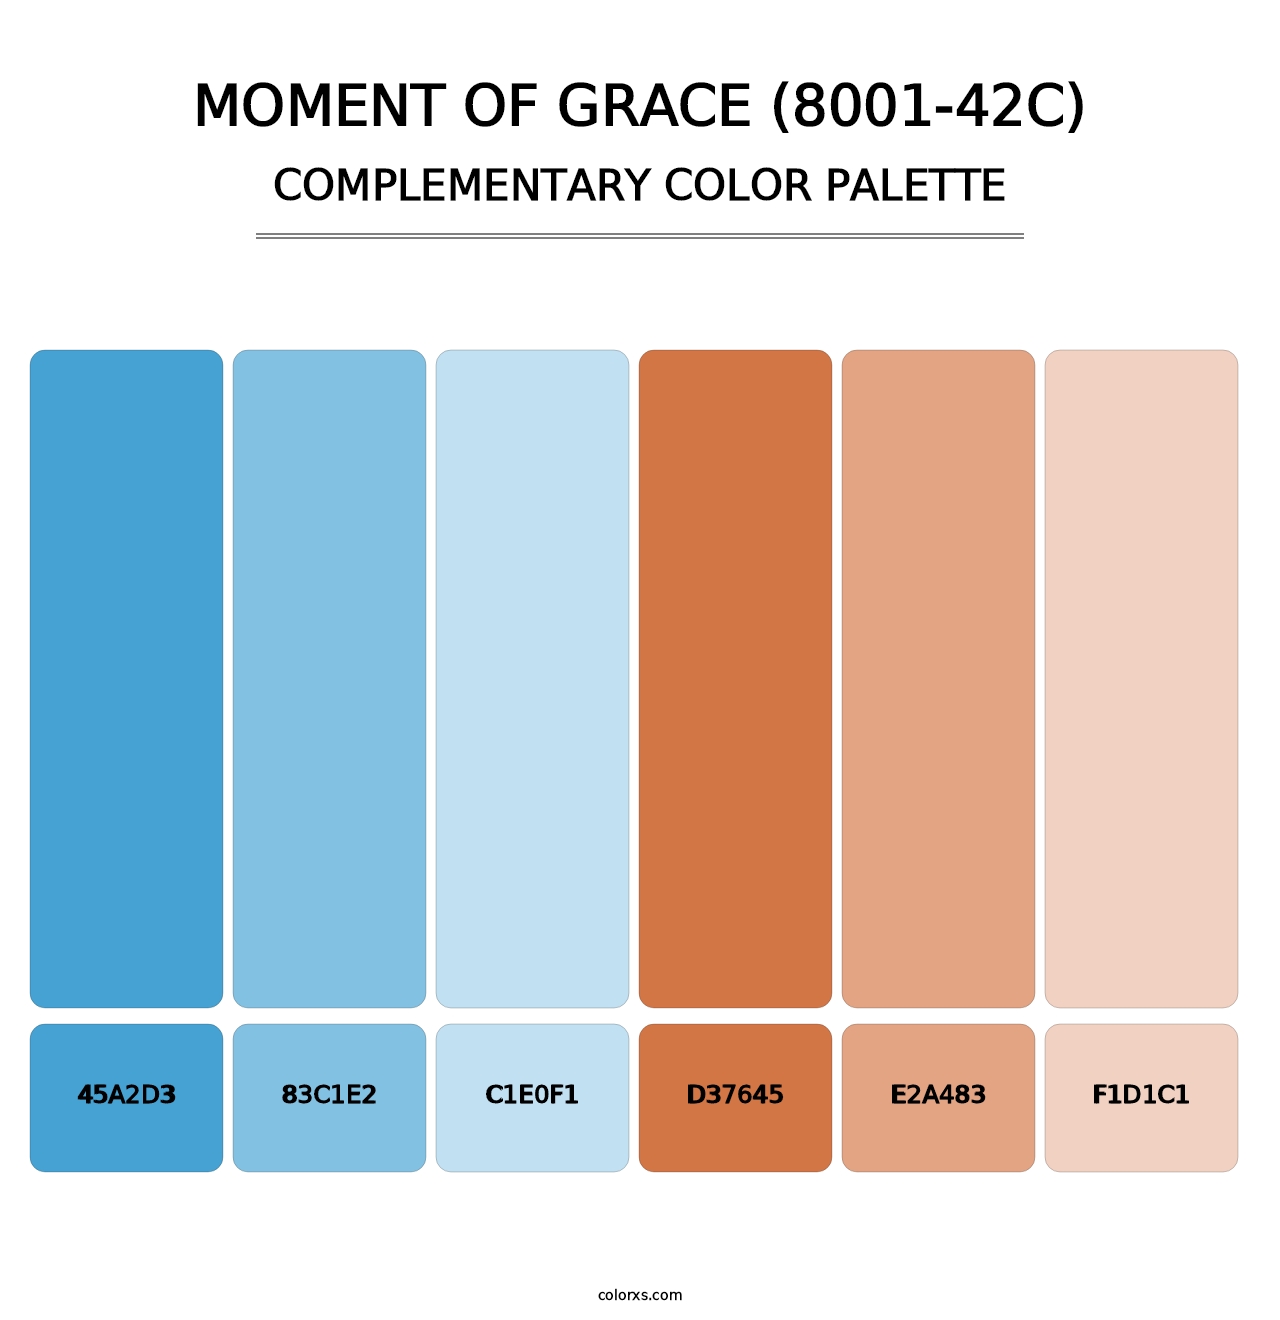 Moment of Grace (8001-42C) - Complementary Color Palette